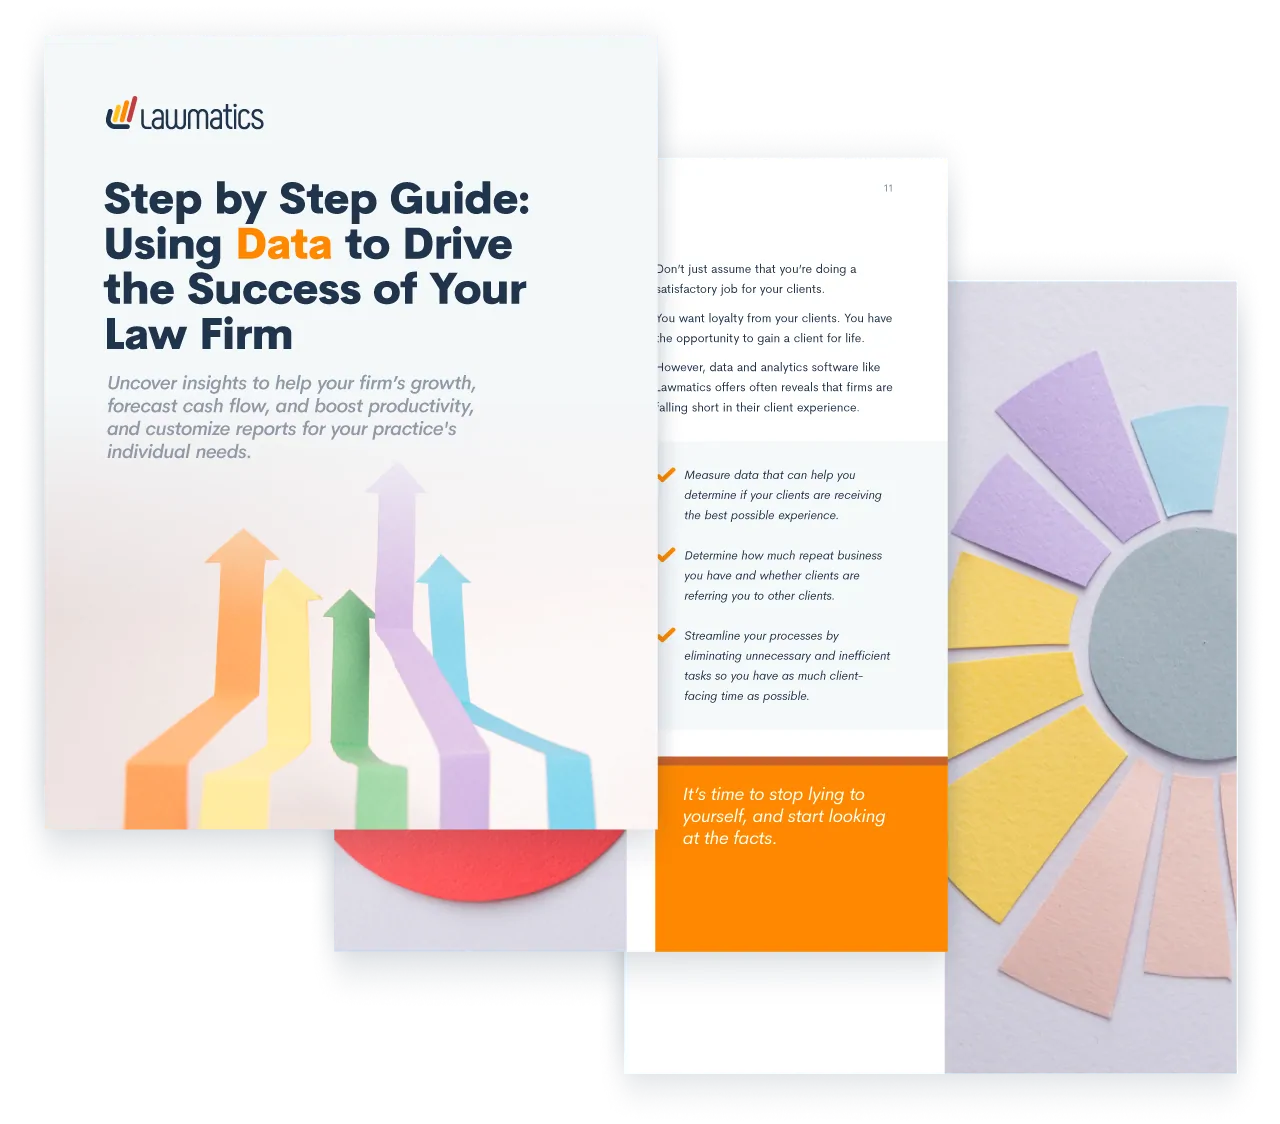 Step by Step Guide: Using Data to Drive the Success of Your Law Firm